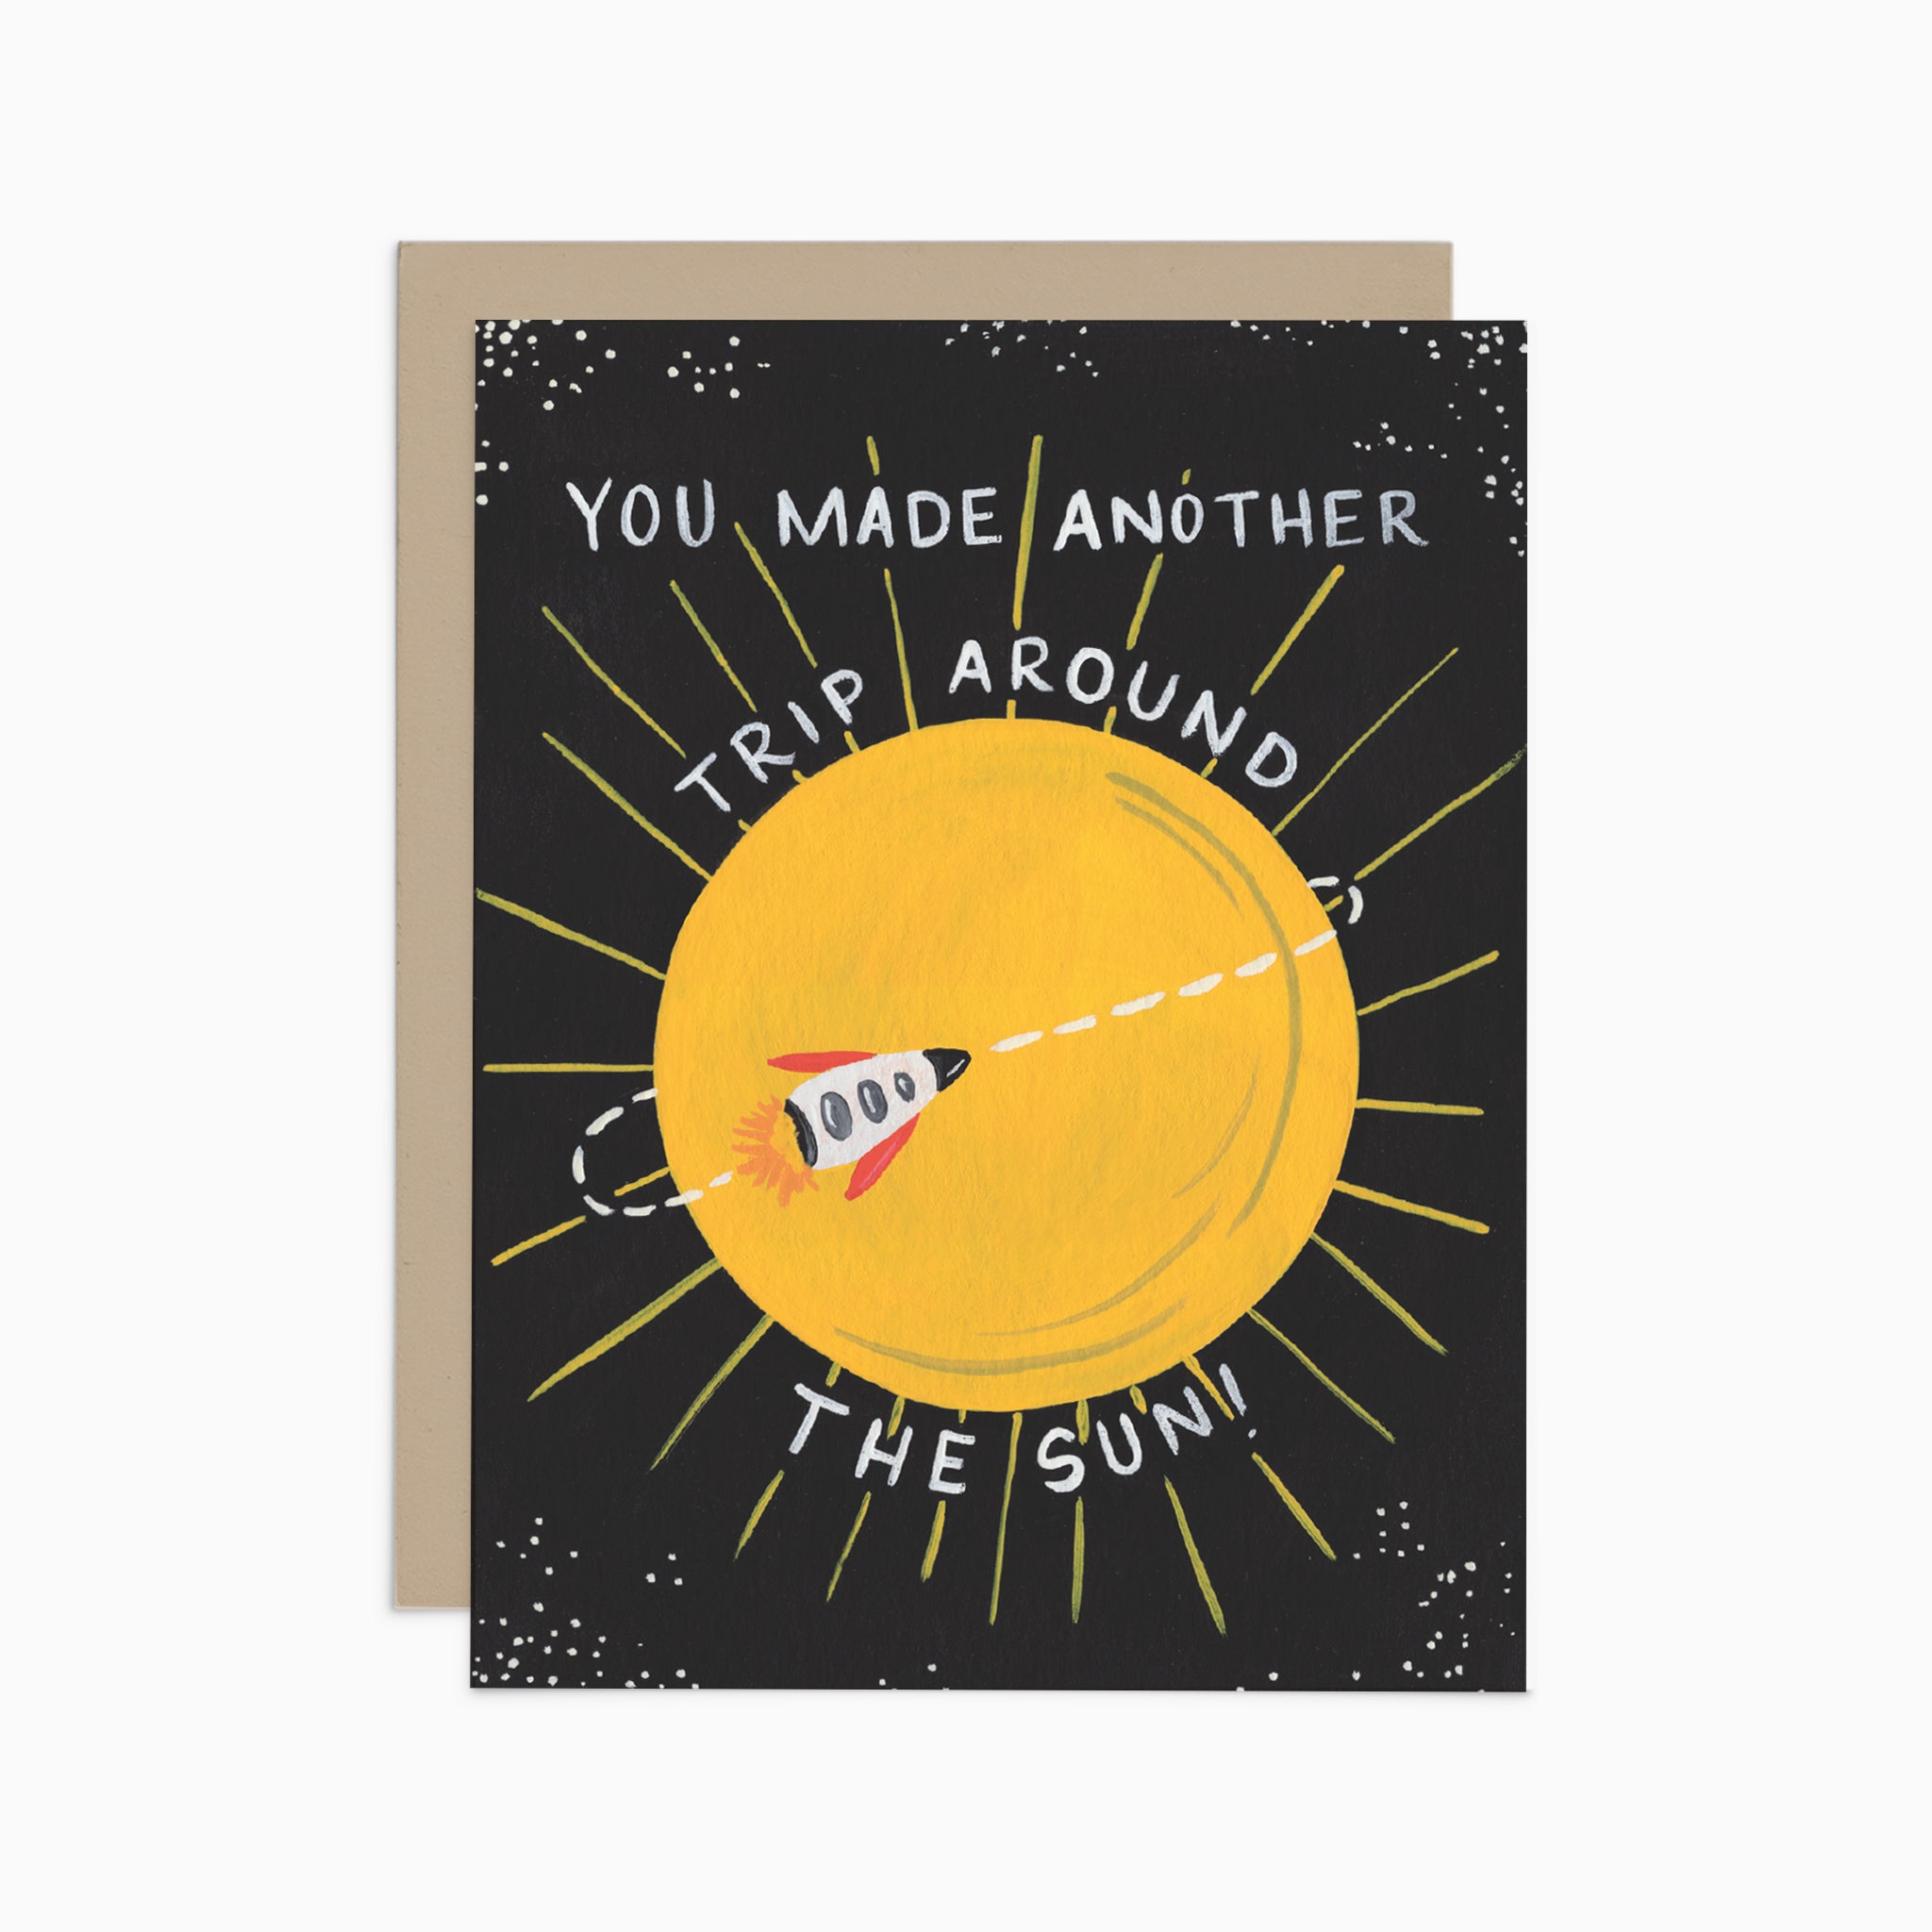 Another Trip Around the Sun Card